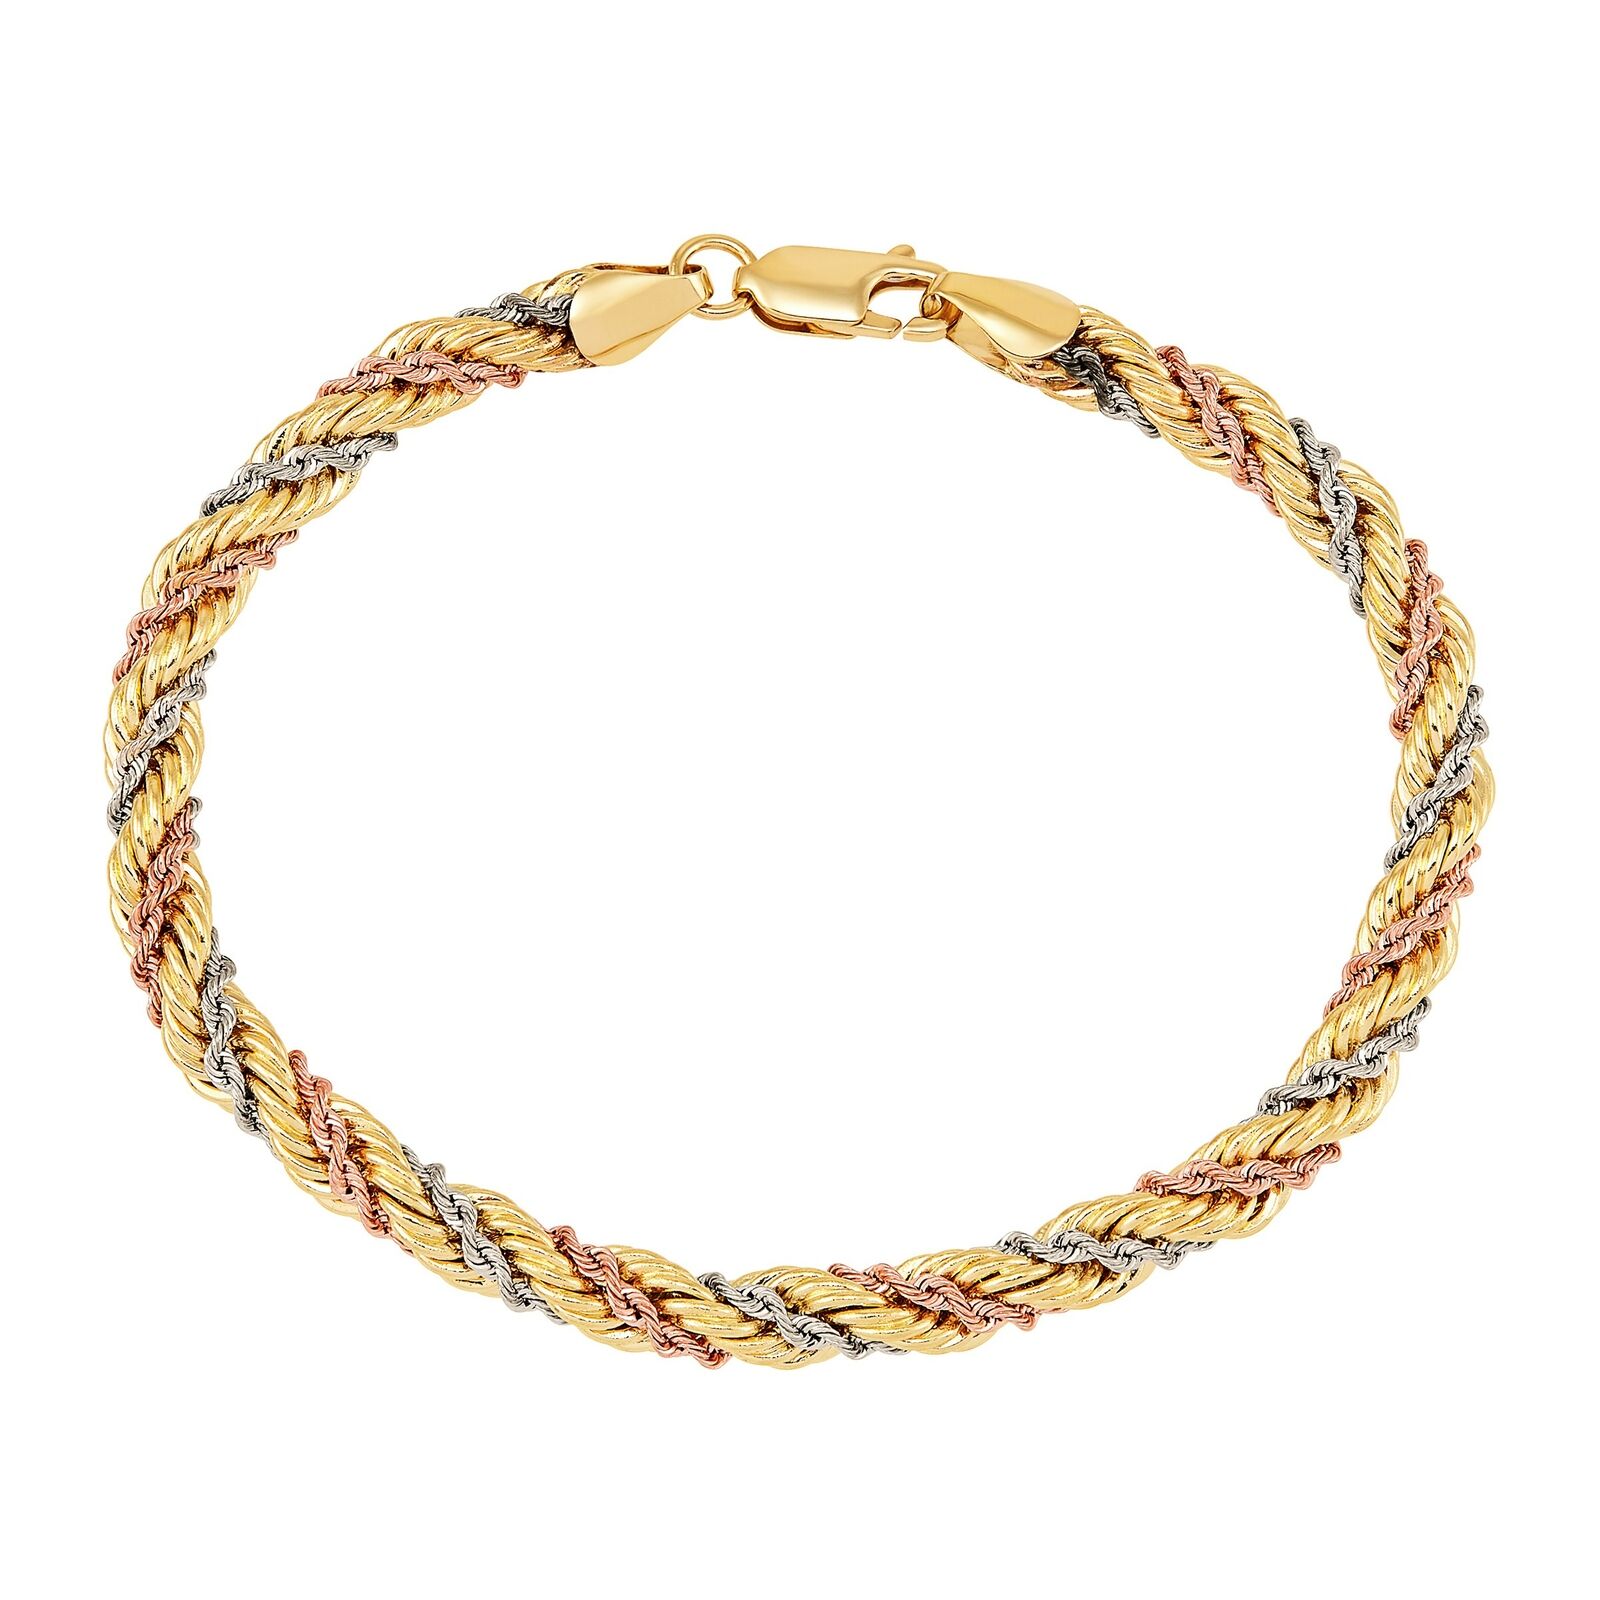 Twisted Rope Chain Bracelet in 14K Three-Tone Gold, 7.5